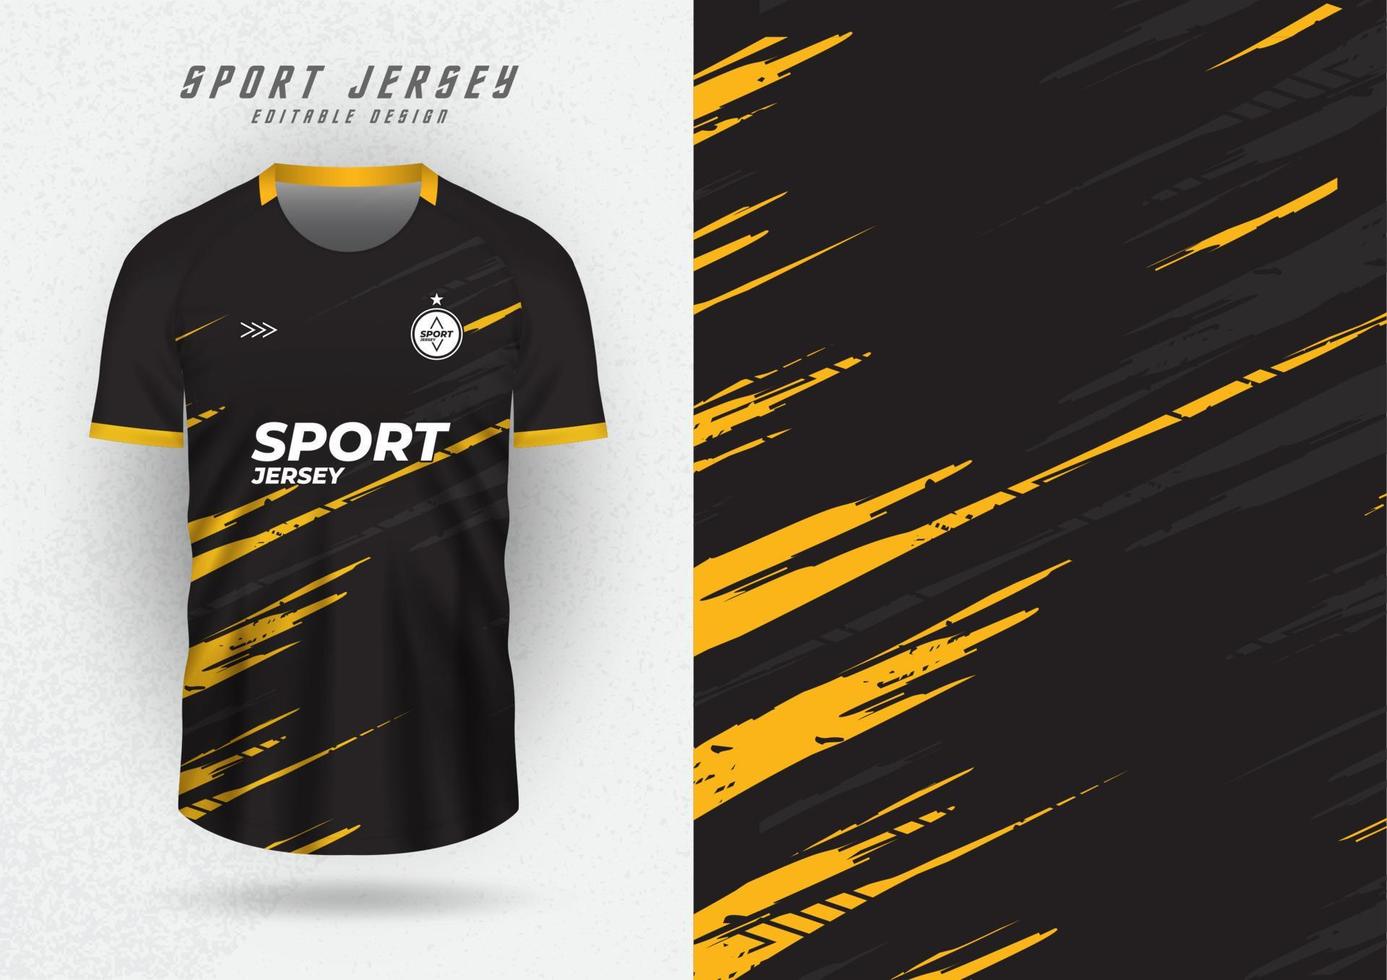 Background for sports jersey, football shirt, running shirt, racing shirt, black tone pattern and yellow side stripes. vector